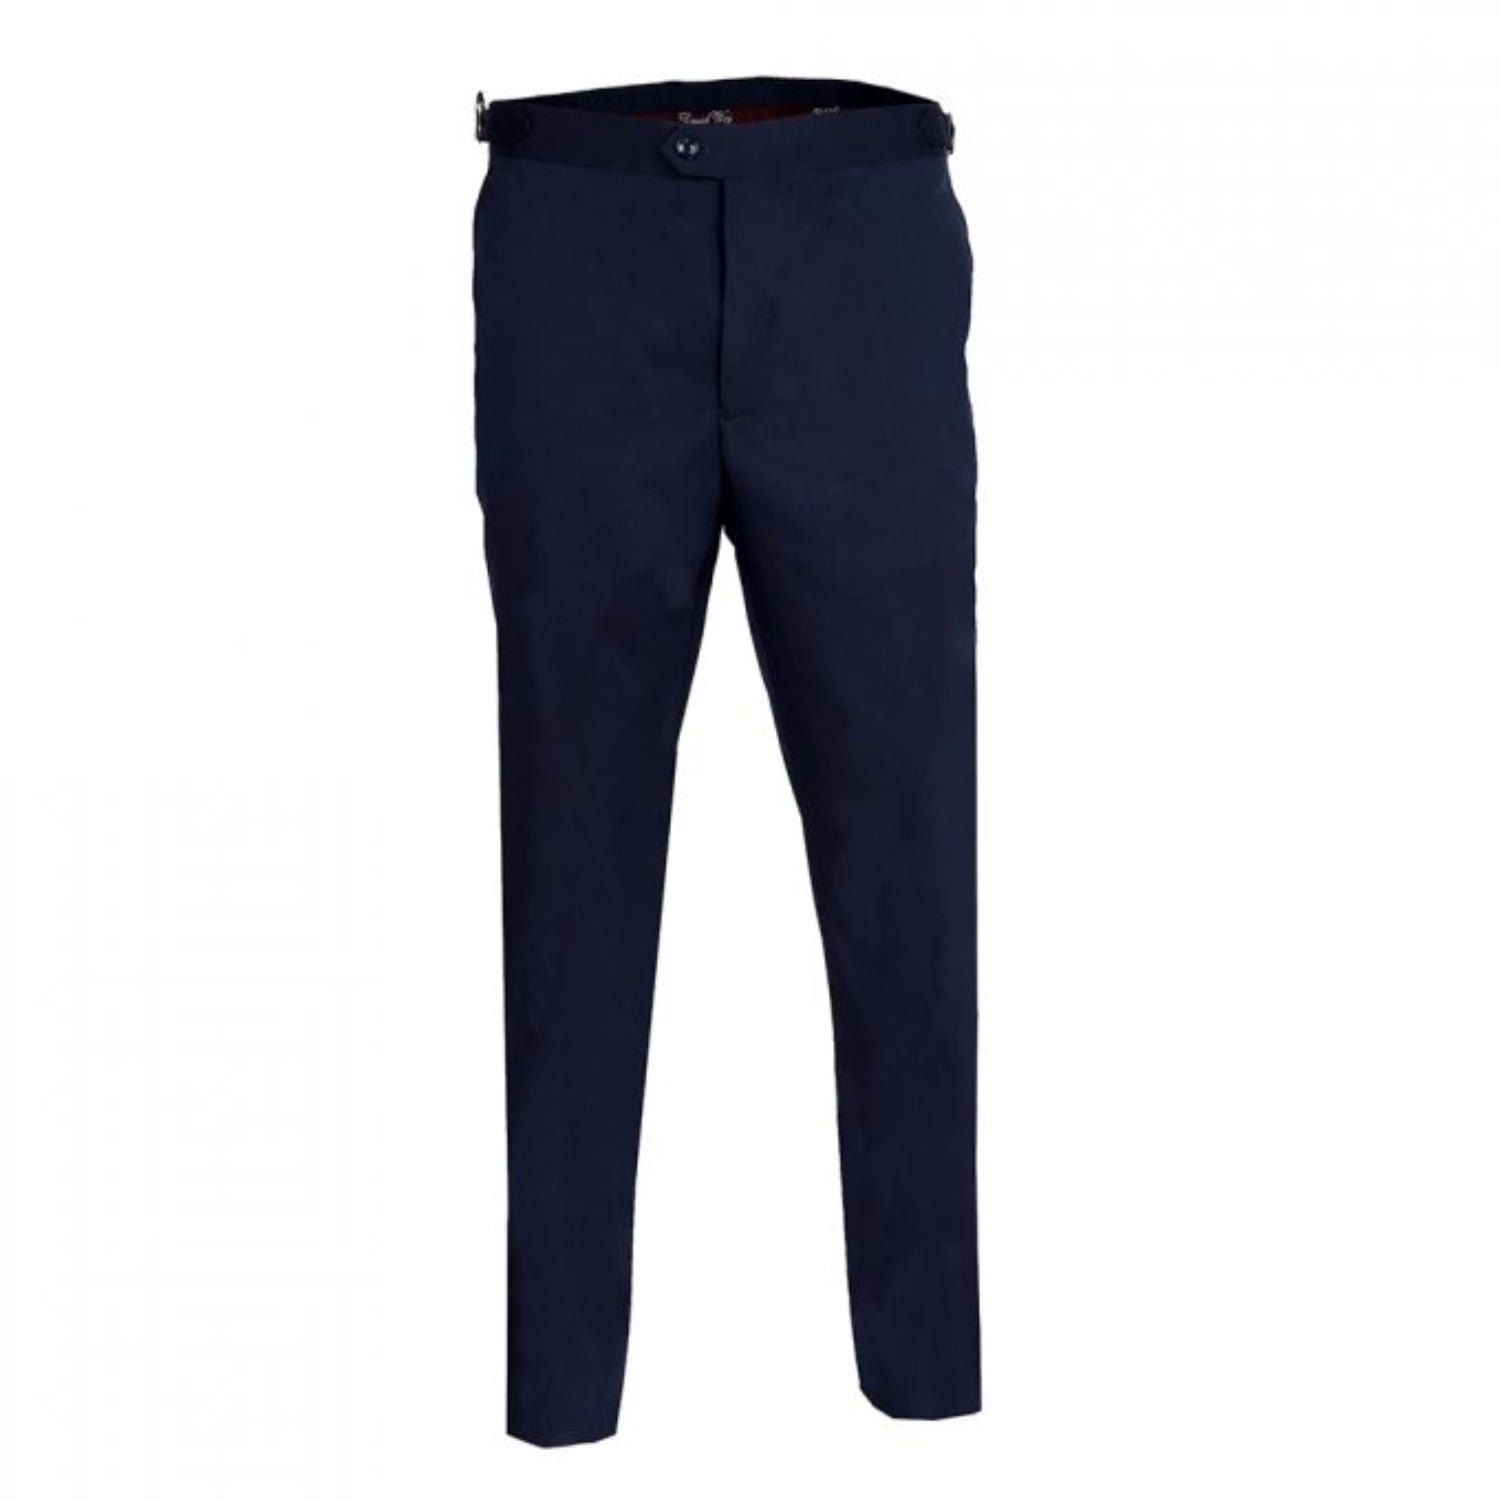 Men’s Blue Plain Dress Trousers With Side Adjusters - Navy 32" David Wej